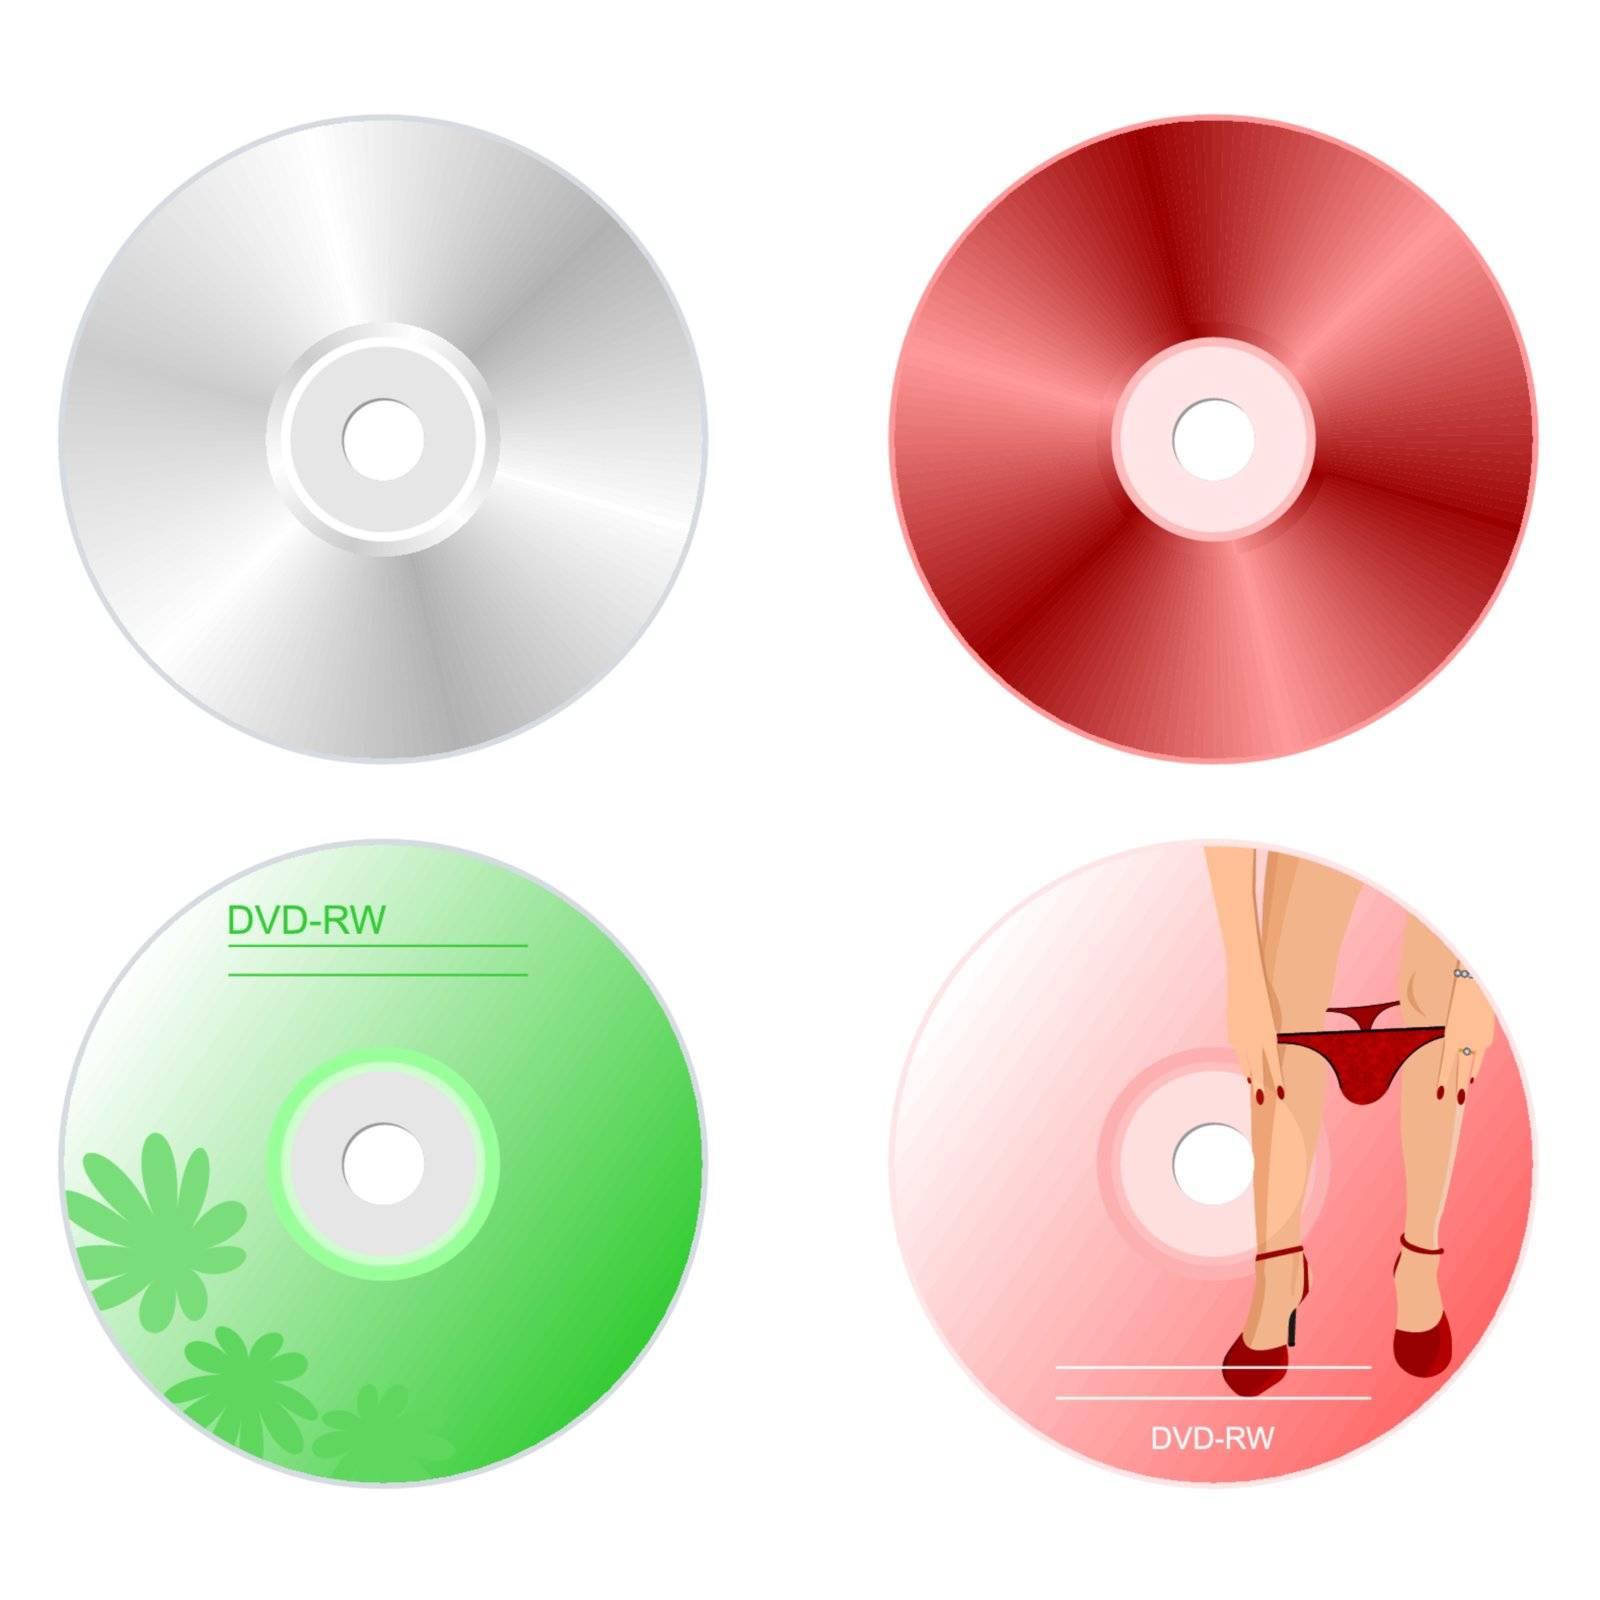 Realistic illustration set DVD disk with both sides by smeagorl